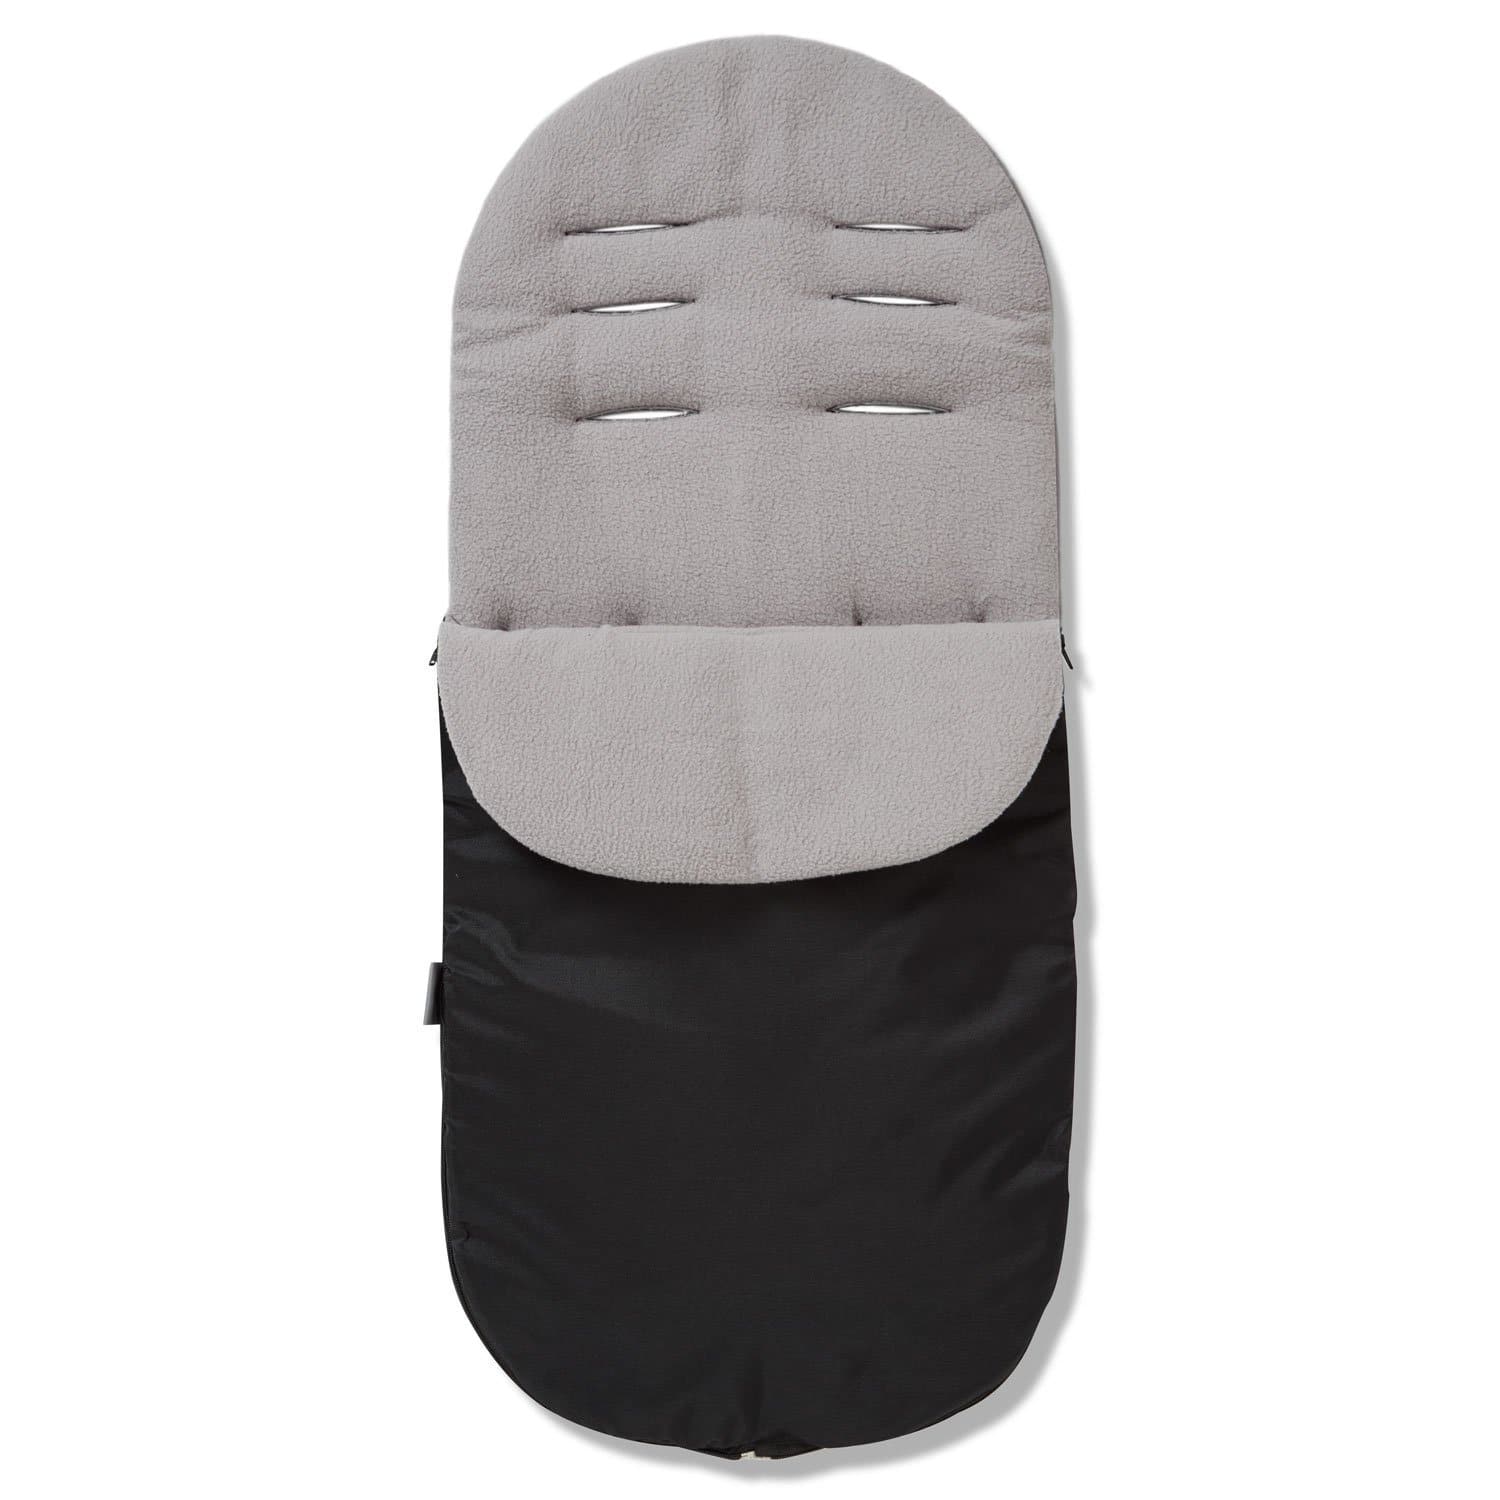 Footmuff / Cosy Toes Compatible with Esprit - Grey / Fits All Models | For Your Little One